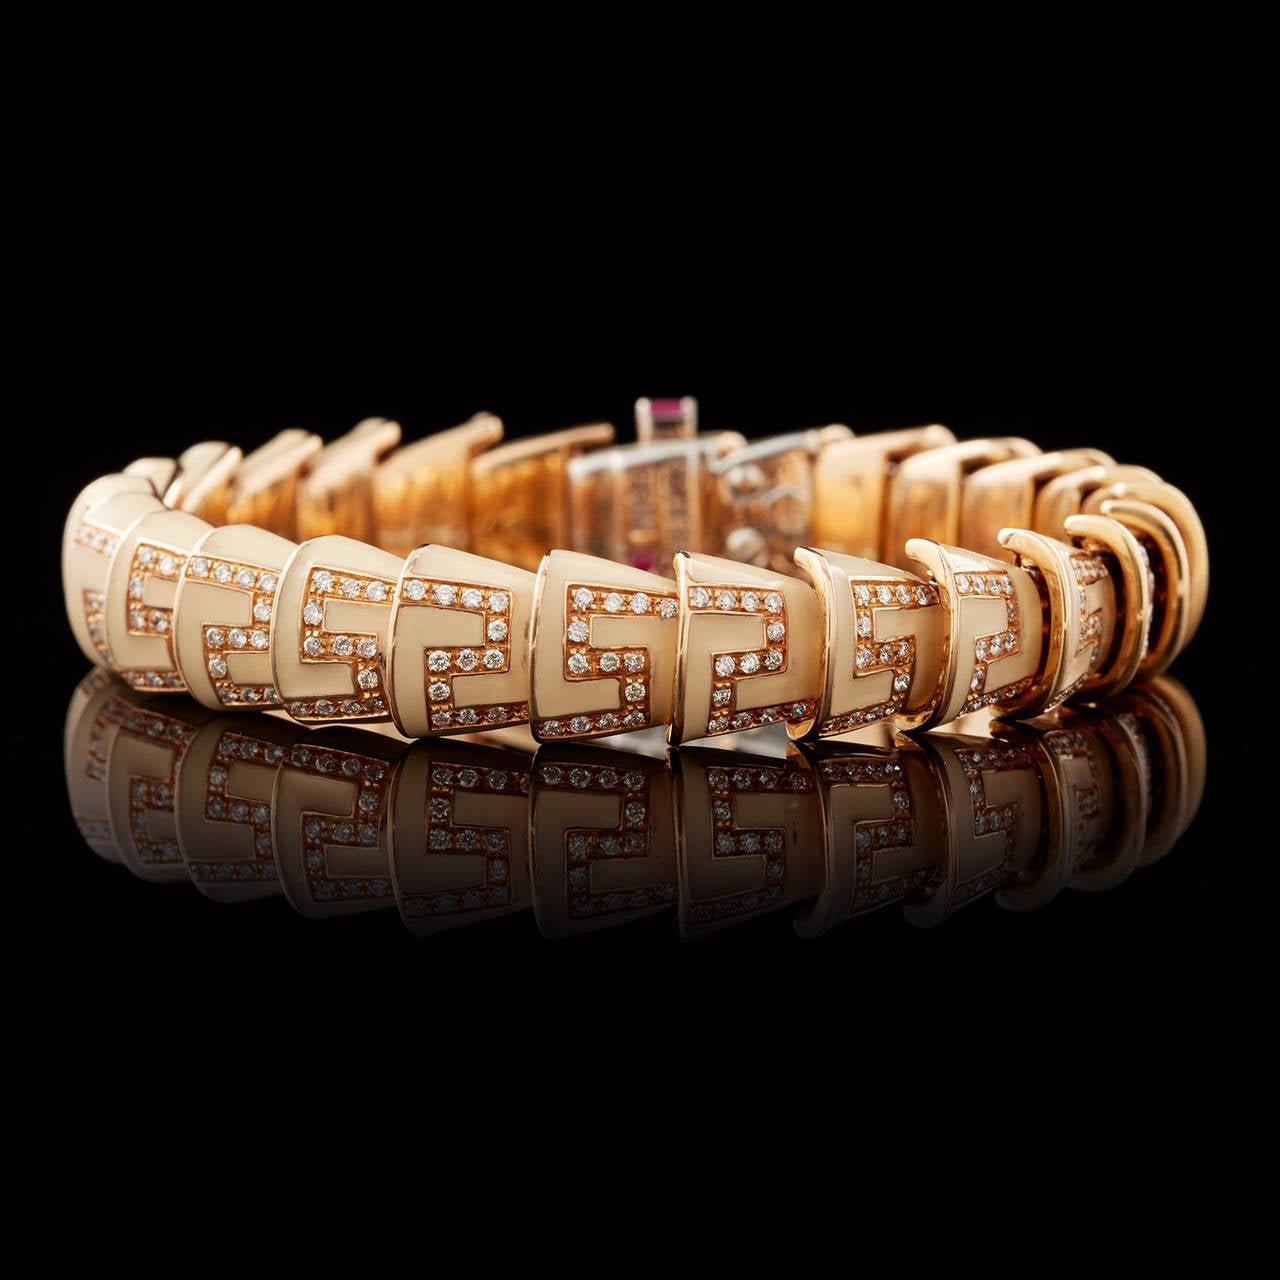 Roberto Coin Cobra design Cream color Enamel Bracelet accented with 1.76 carats of Round Brilliant Diamonds set in 18Kt Rose Gold. This bracelet measures 7″ L x 0.38″ W and weighs 49.5 grams total.